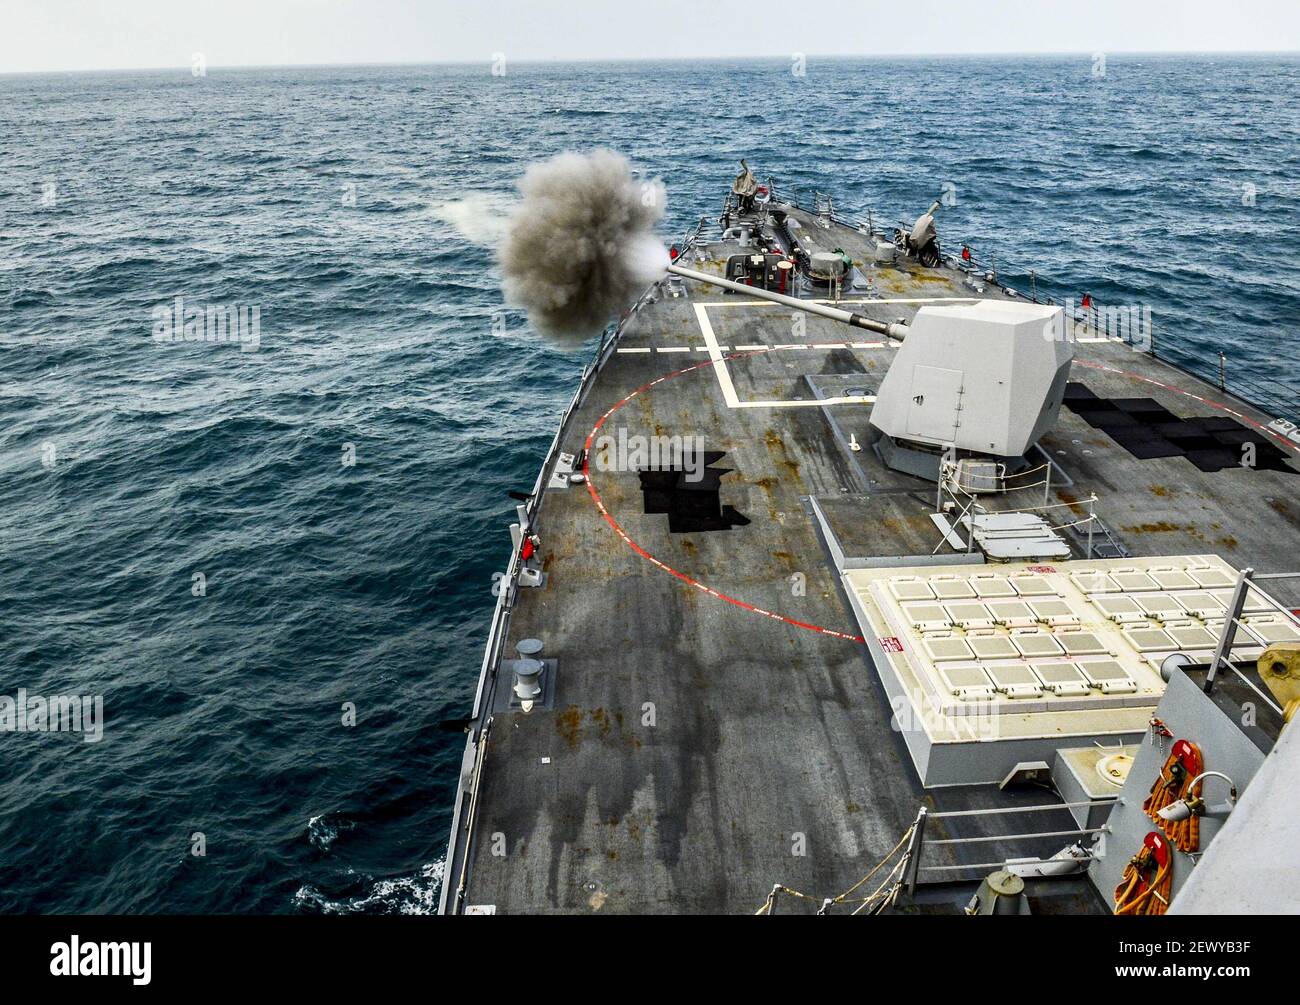 ARABIAN GULF (Jan. 11, 2015) The guided-missile destroyer USS Sterett (DDG 104) conducts a live-fire exercise with its MK 45 5-inch 54/62 caliber gun. Sterett is deployed as part of the Carl Vinson Carrier Strike Group supporting maritime security operations, strike operations in Iraq and Syria as directed and theater security cooperation efforts in the U.S. 5th Fleet area of responsibility. (Photo by Mass Communication Specialist 3rd Class Eric Coffer/U.S. Navy) *** Please Use Credit from Credit Field *** Stock Photo